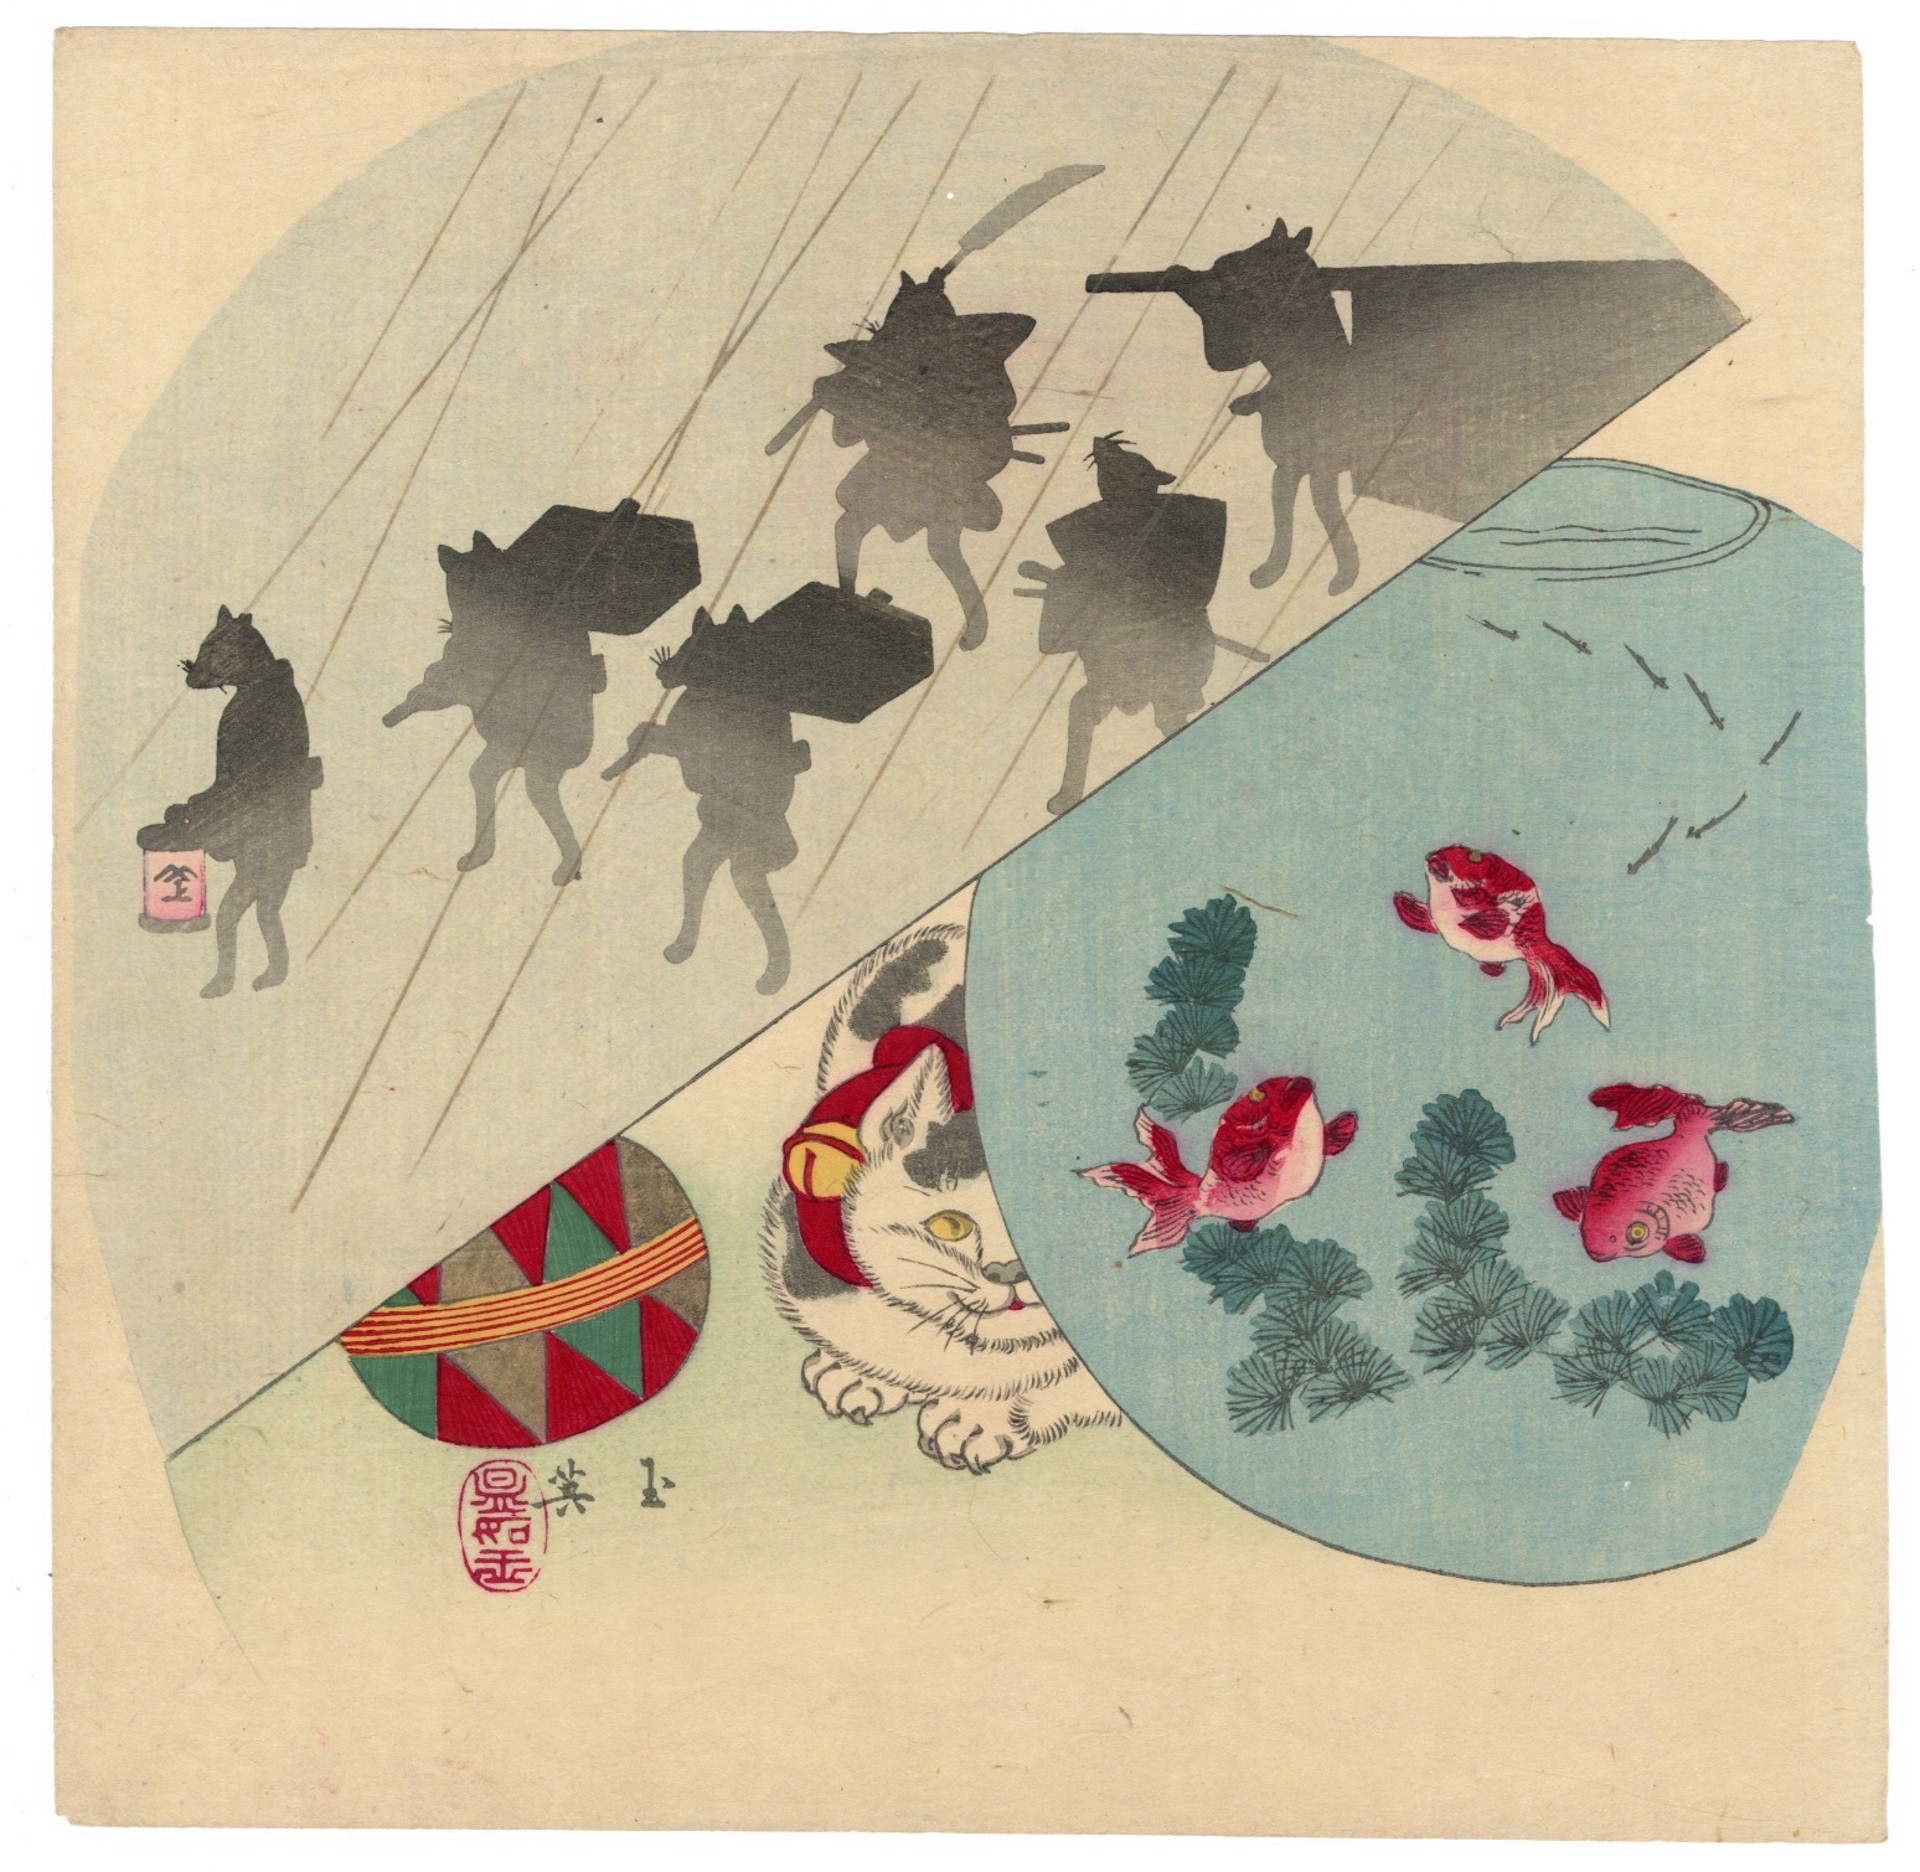 A Fox Procession at Night and a Cat Eying a fishbowl by Gyokuei (1847 - 1902?)